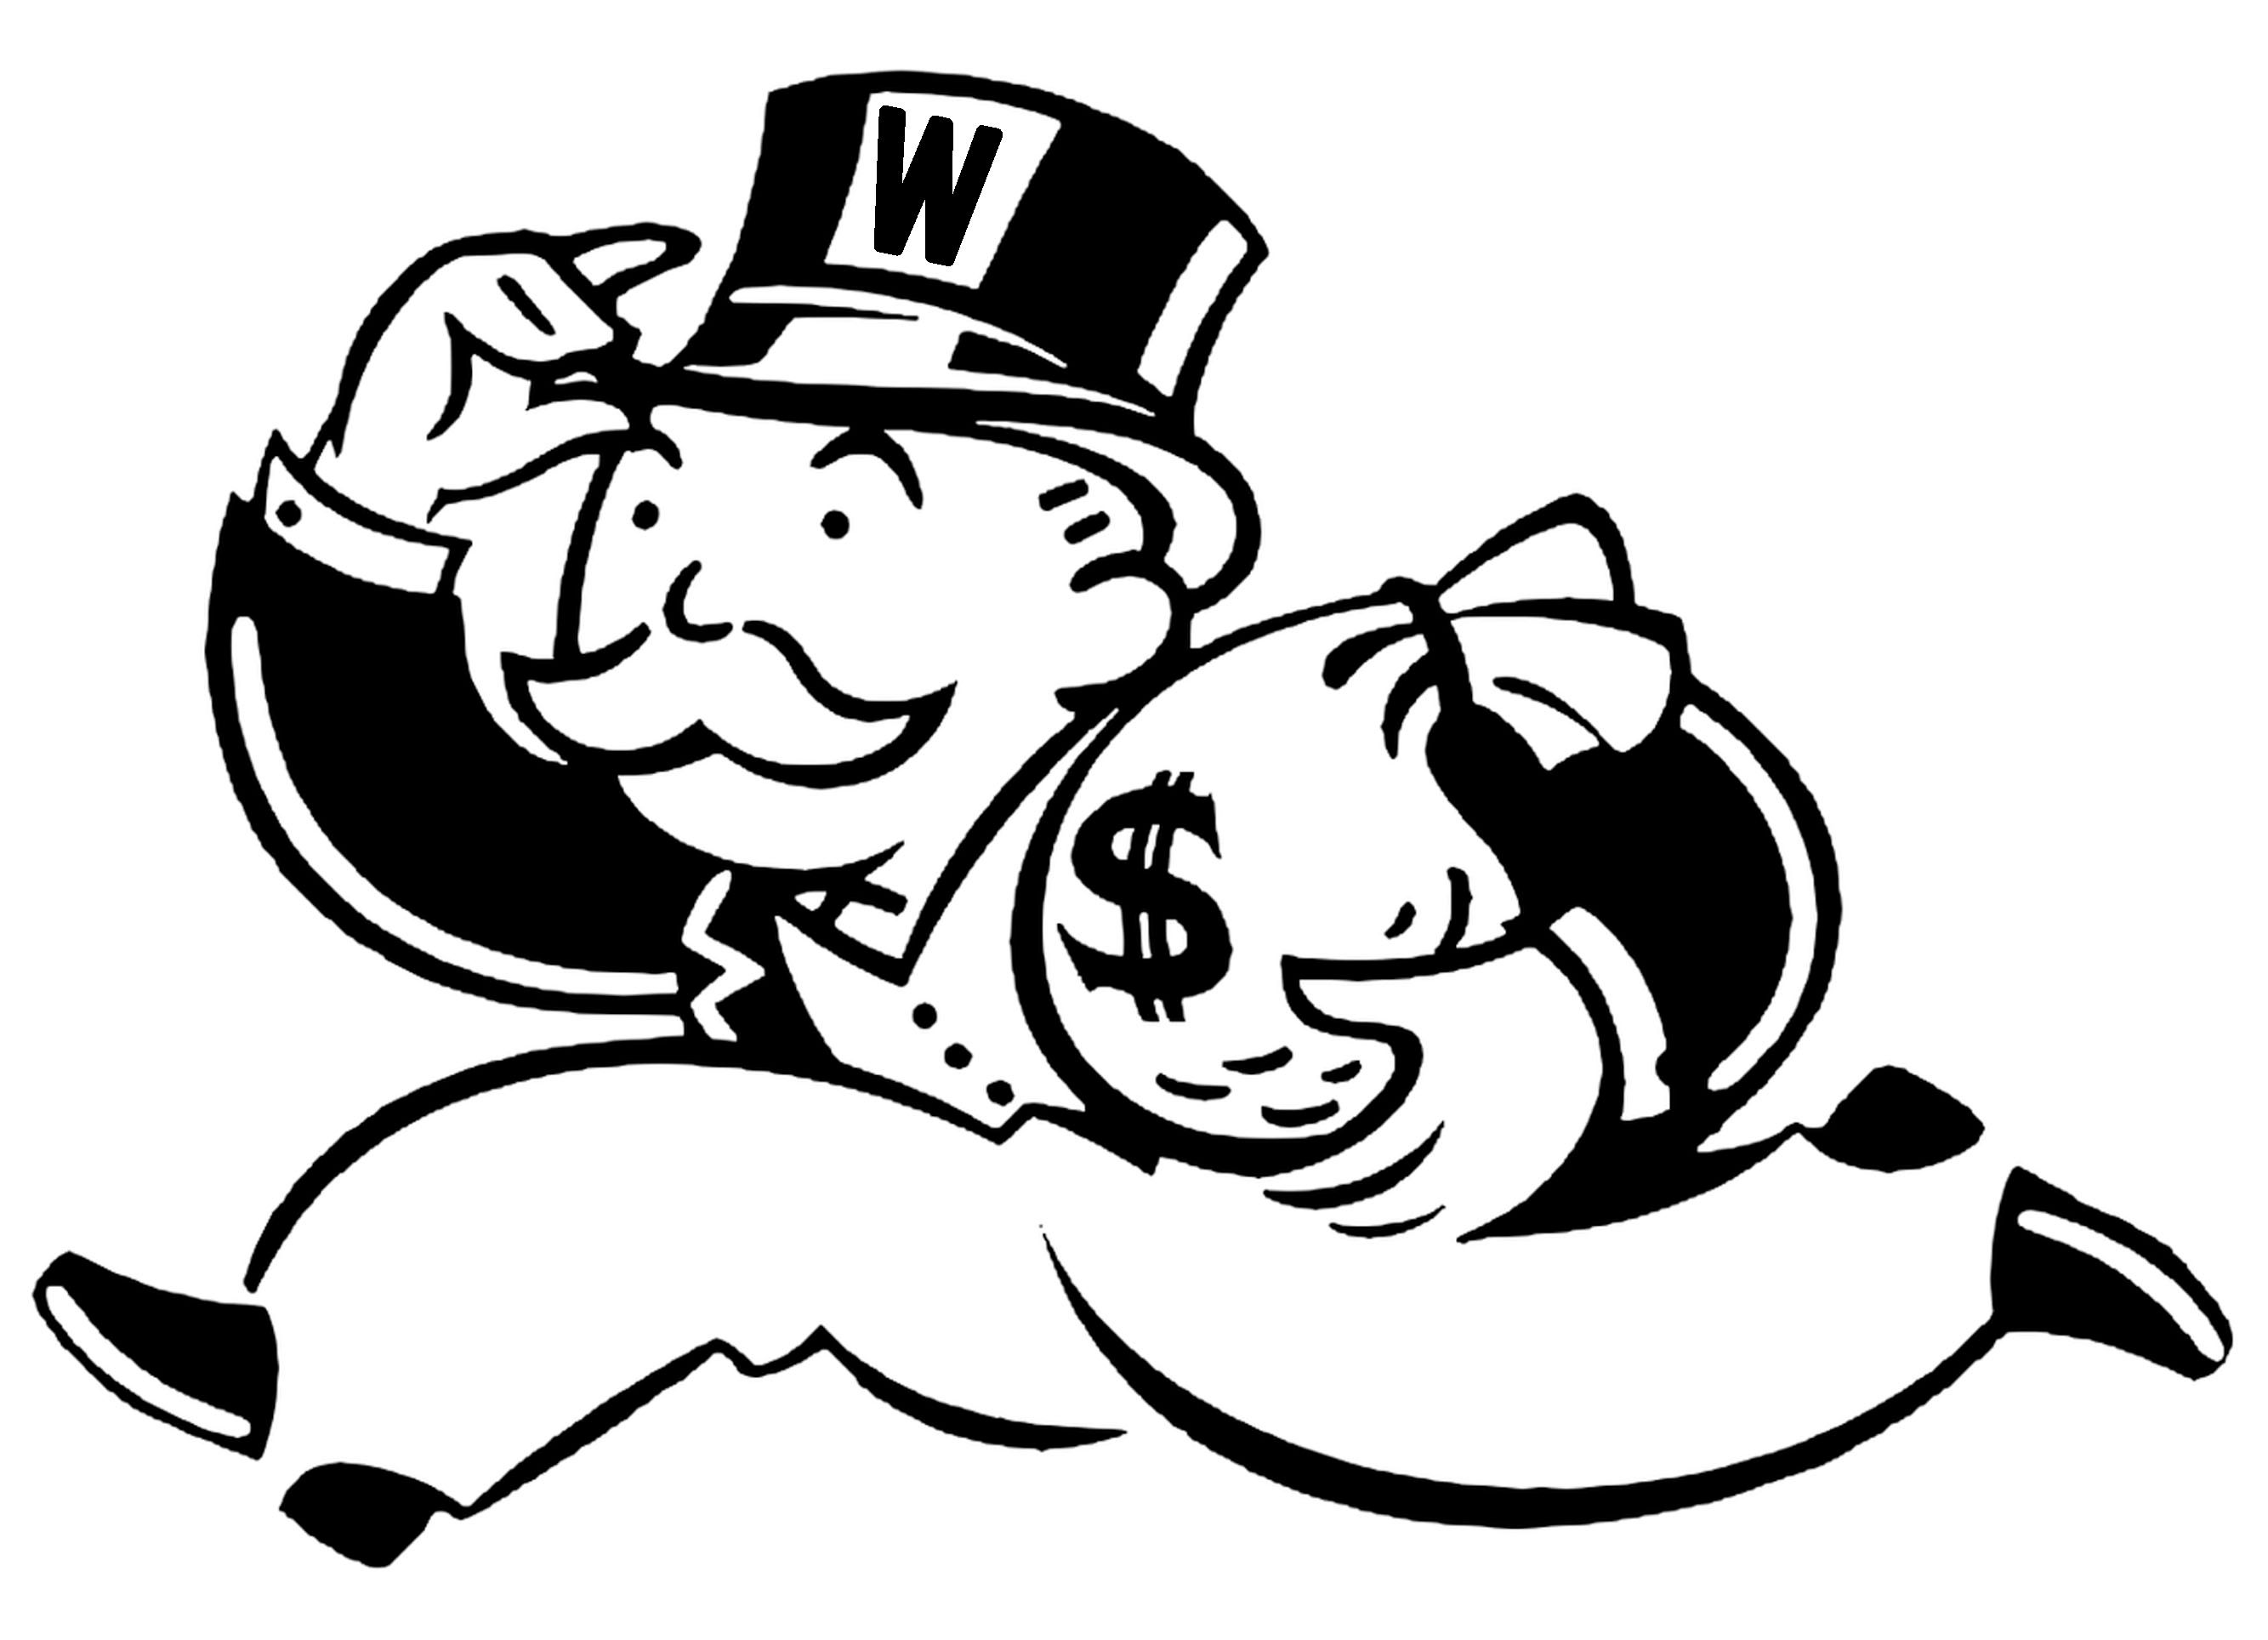 Mr. Monopoly carrying bag of money